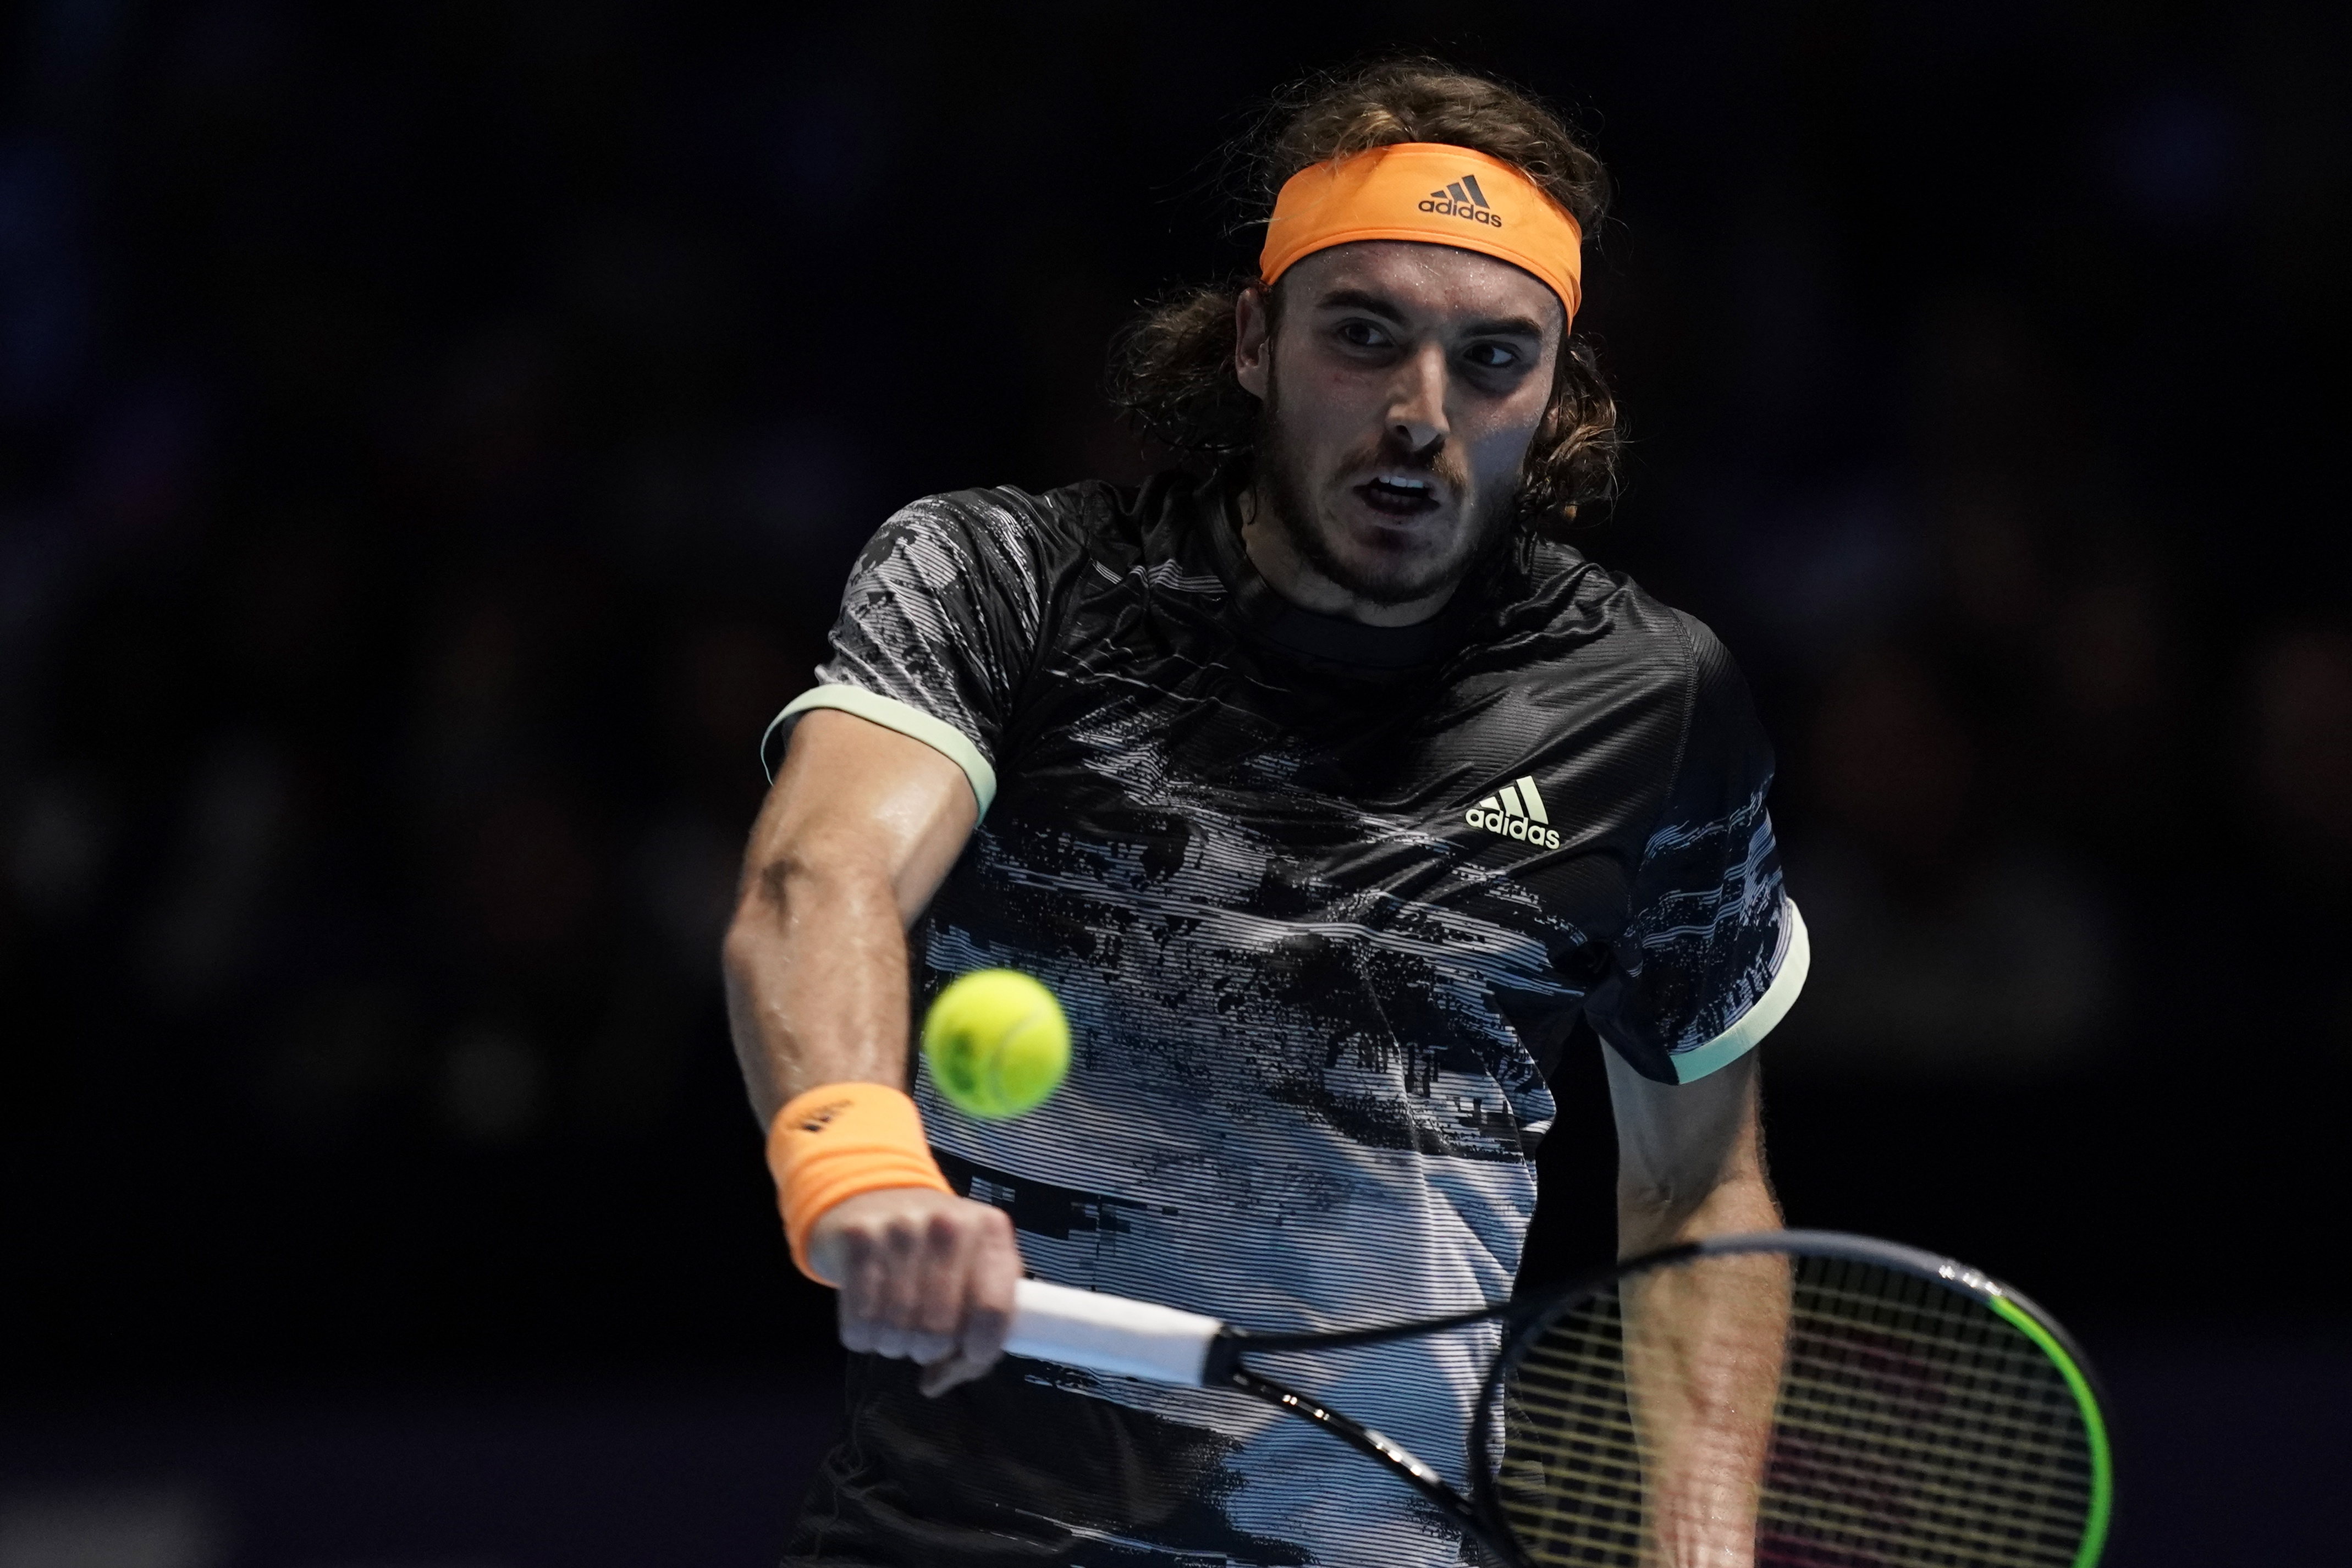 epa08001915 Stefanos Tsitsipas of Greece returns to Roger Federer of Switzerland during their mens semi final match at the ATP World Tour Finals tennis tournament in London, Britain, 16 November 2019.  EPA/WILL OLIVER